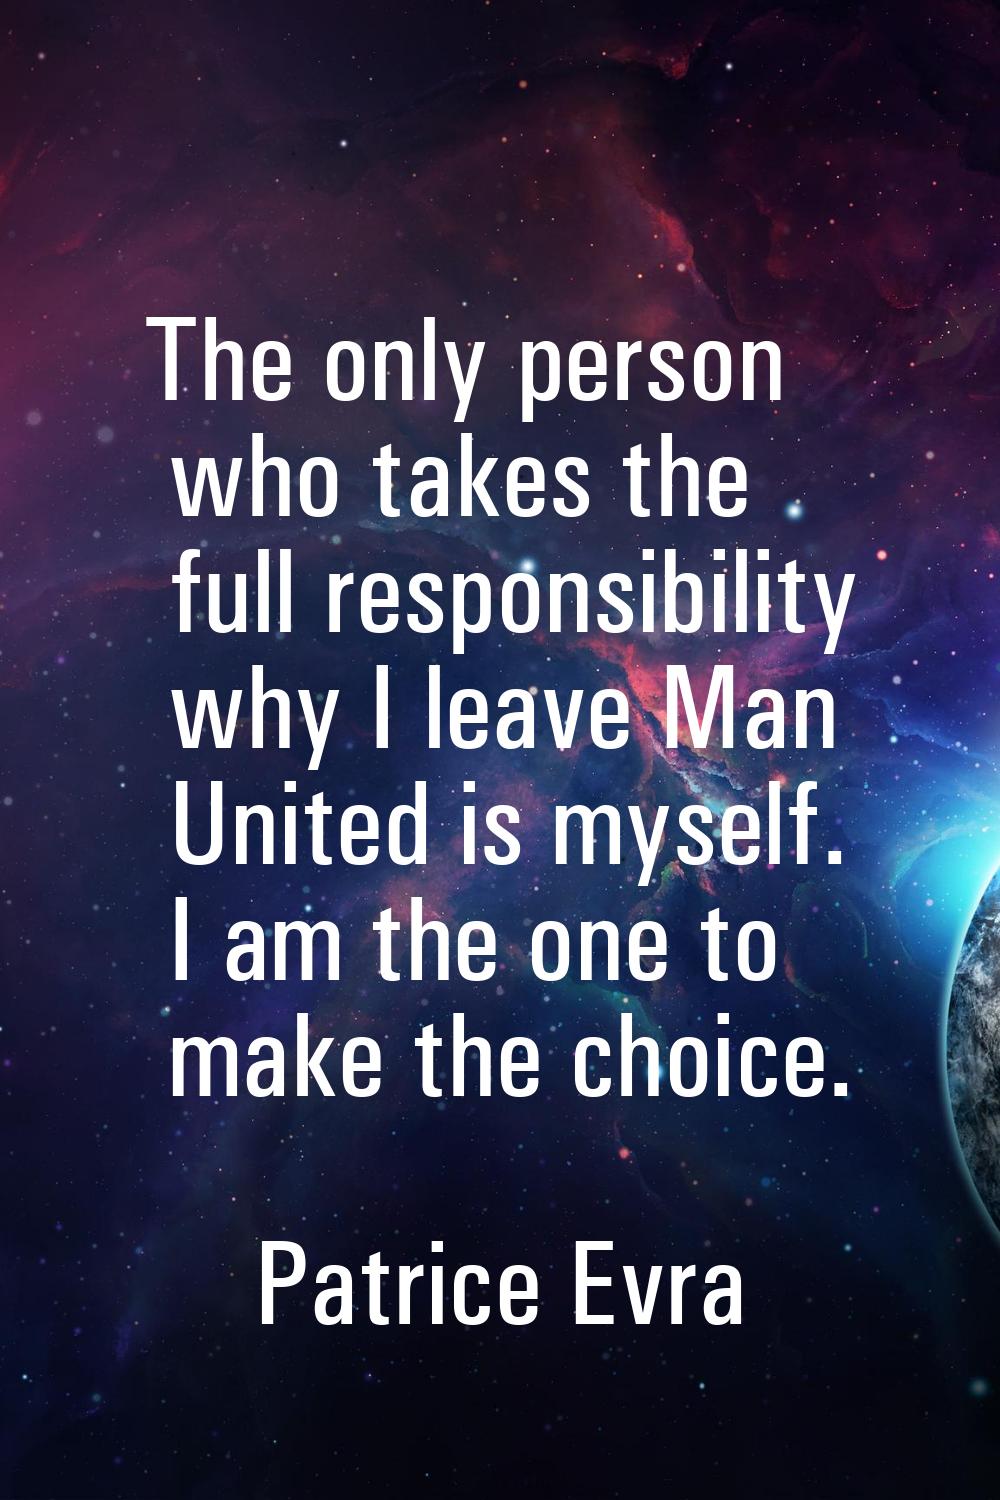 The only person who takes the full responsibility why I leave Man United is myself. I am the one to